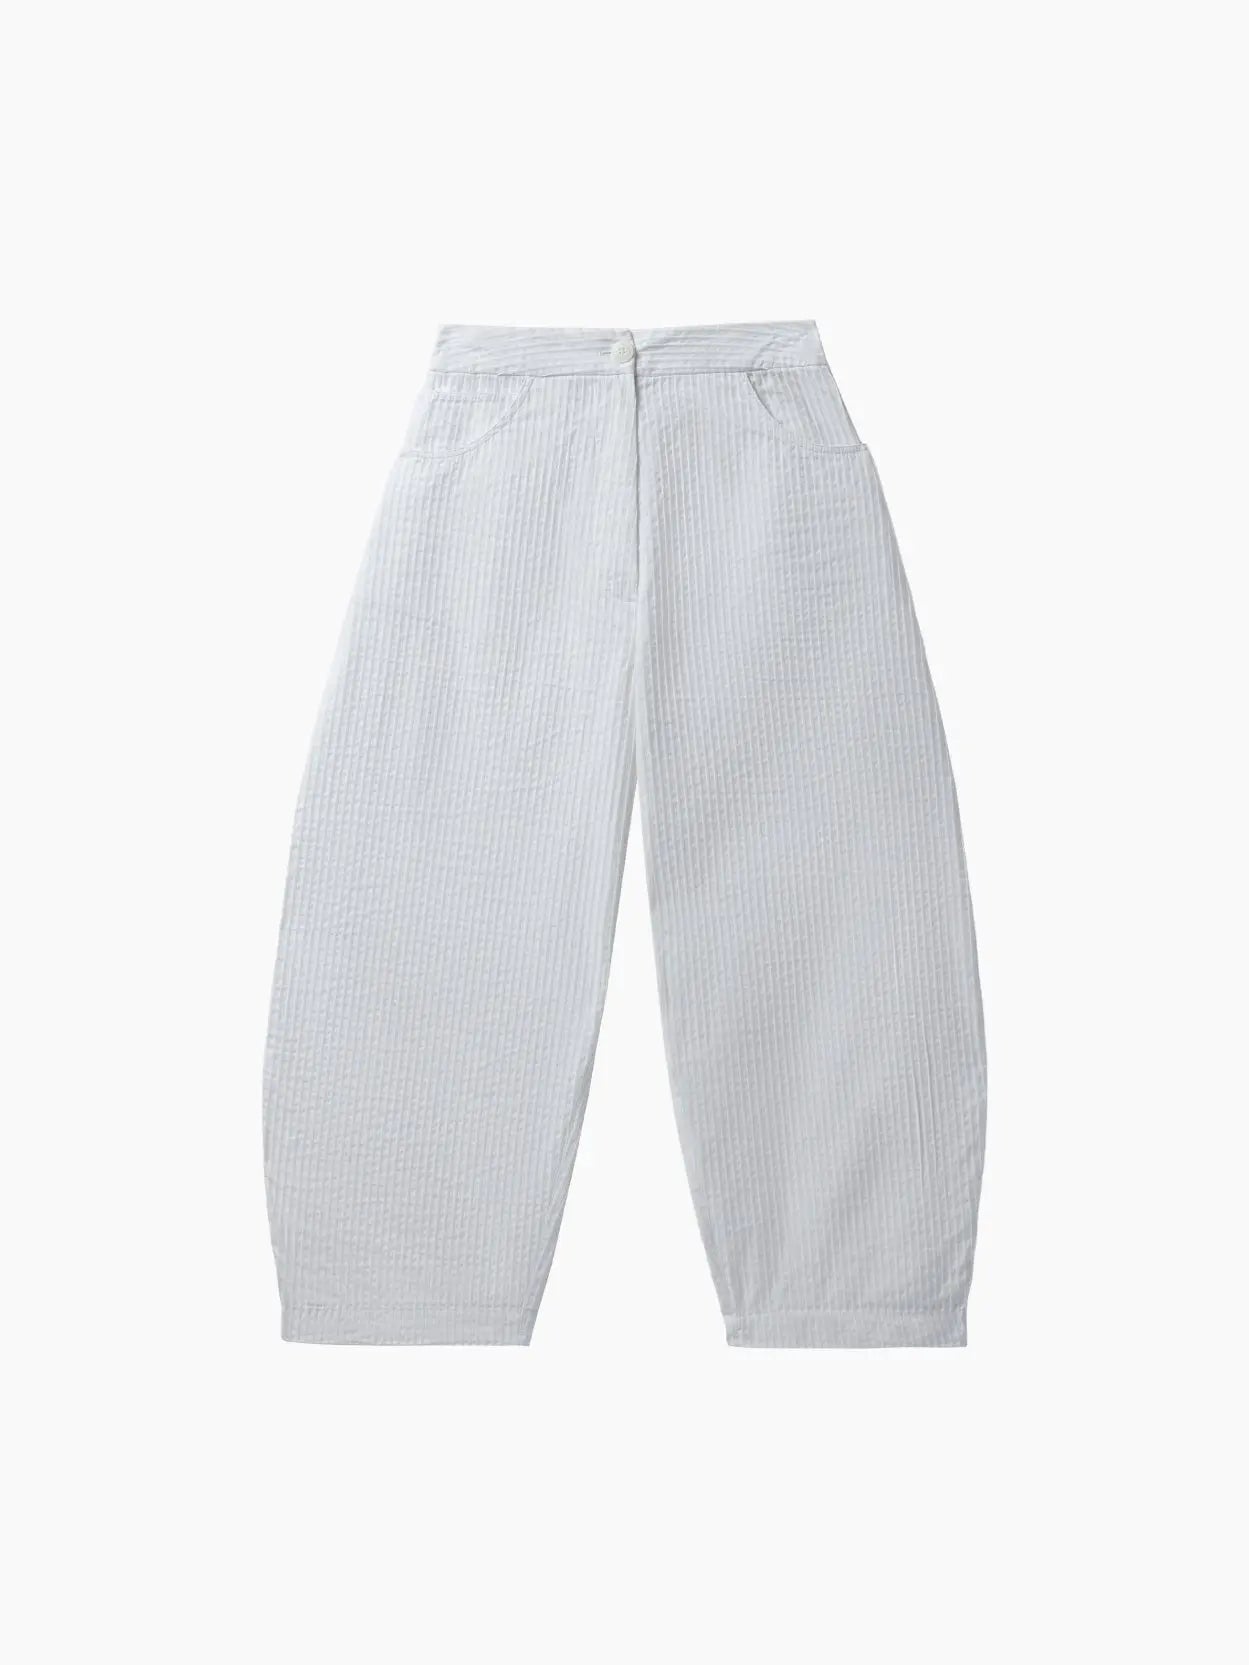 A pair of Tubular Curved Pants White from Cordera. The pants feature a high waist with a button and zipper closure, along with two front pockets. The fabric appears soft and slightly textured. Available at Bassalstore in Barcelona.